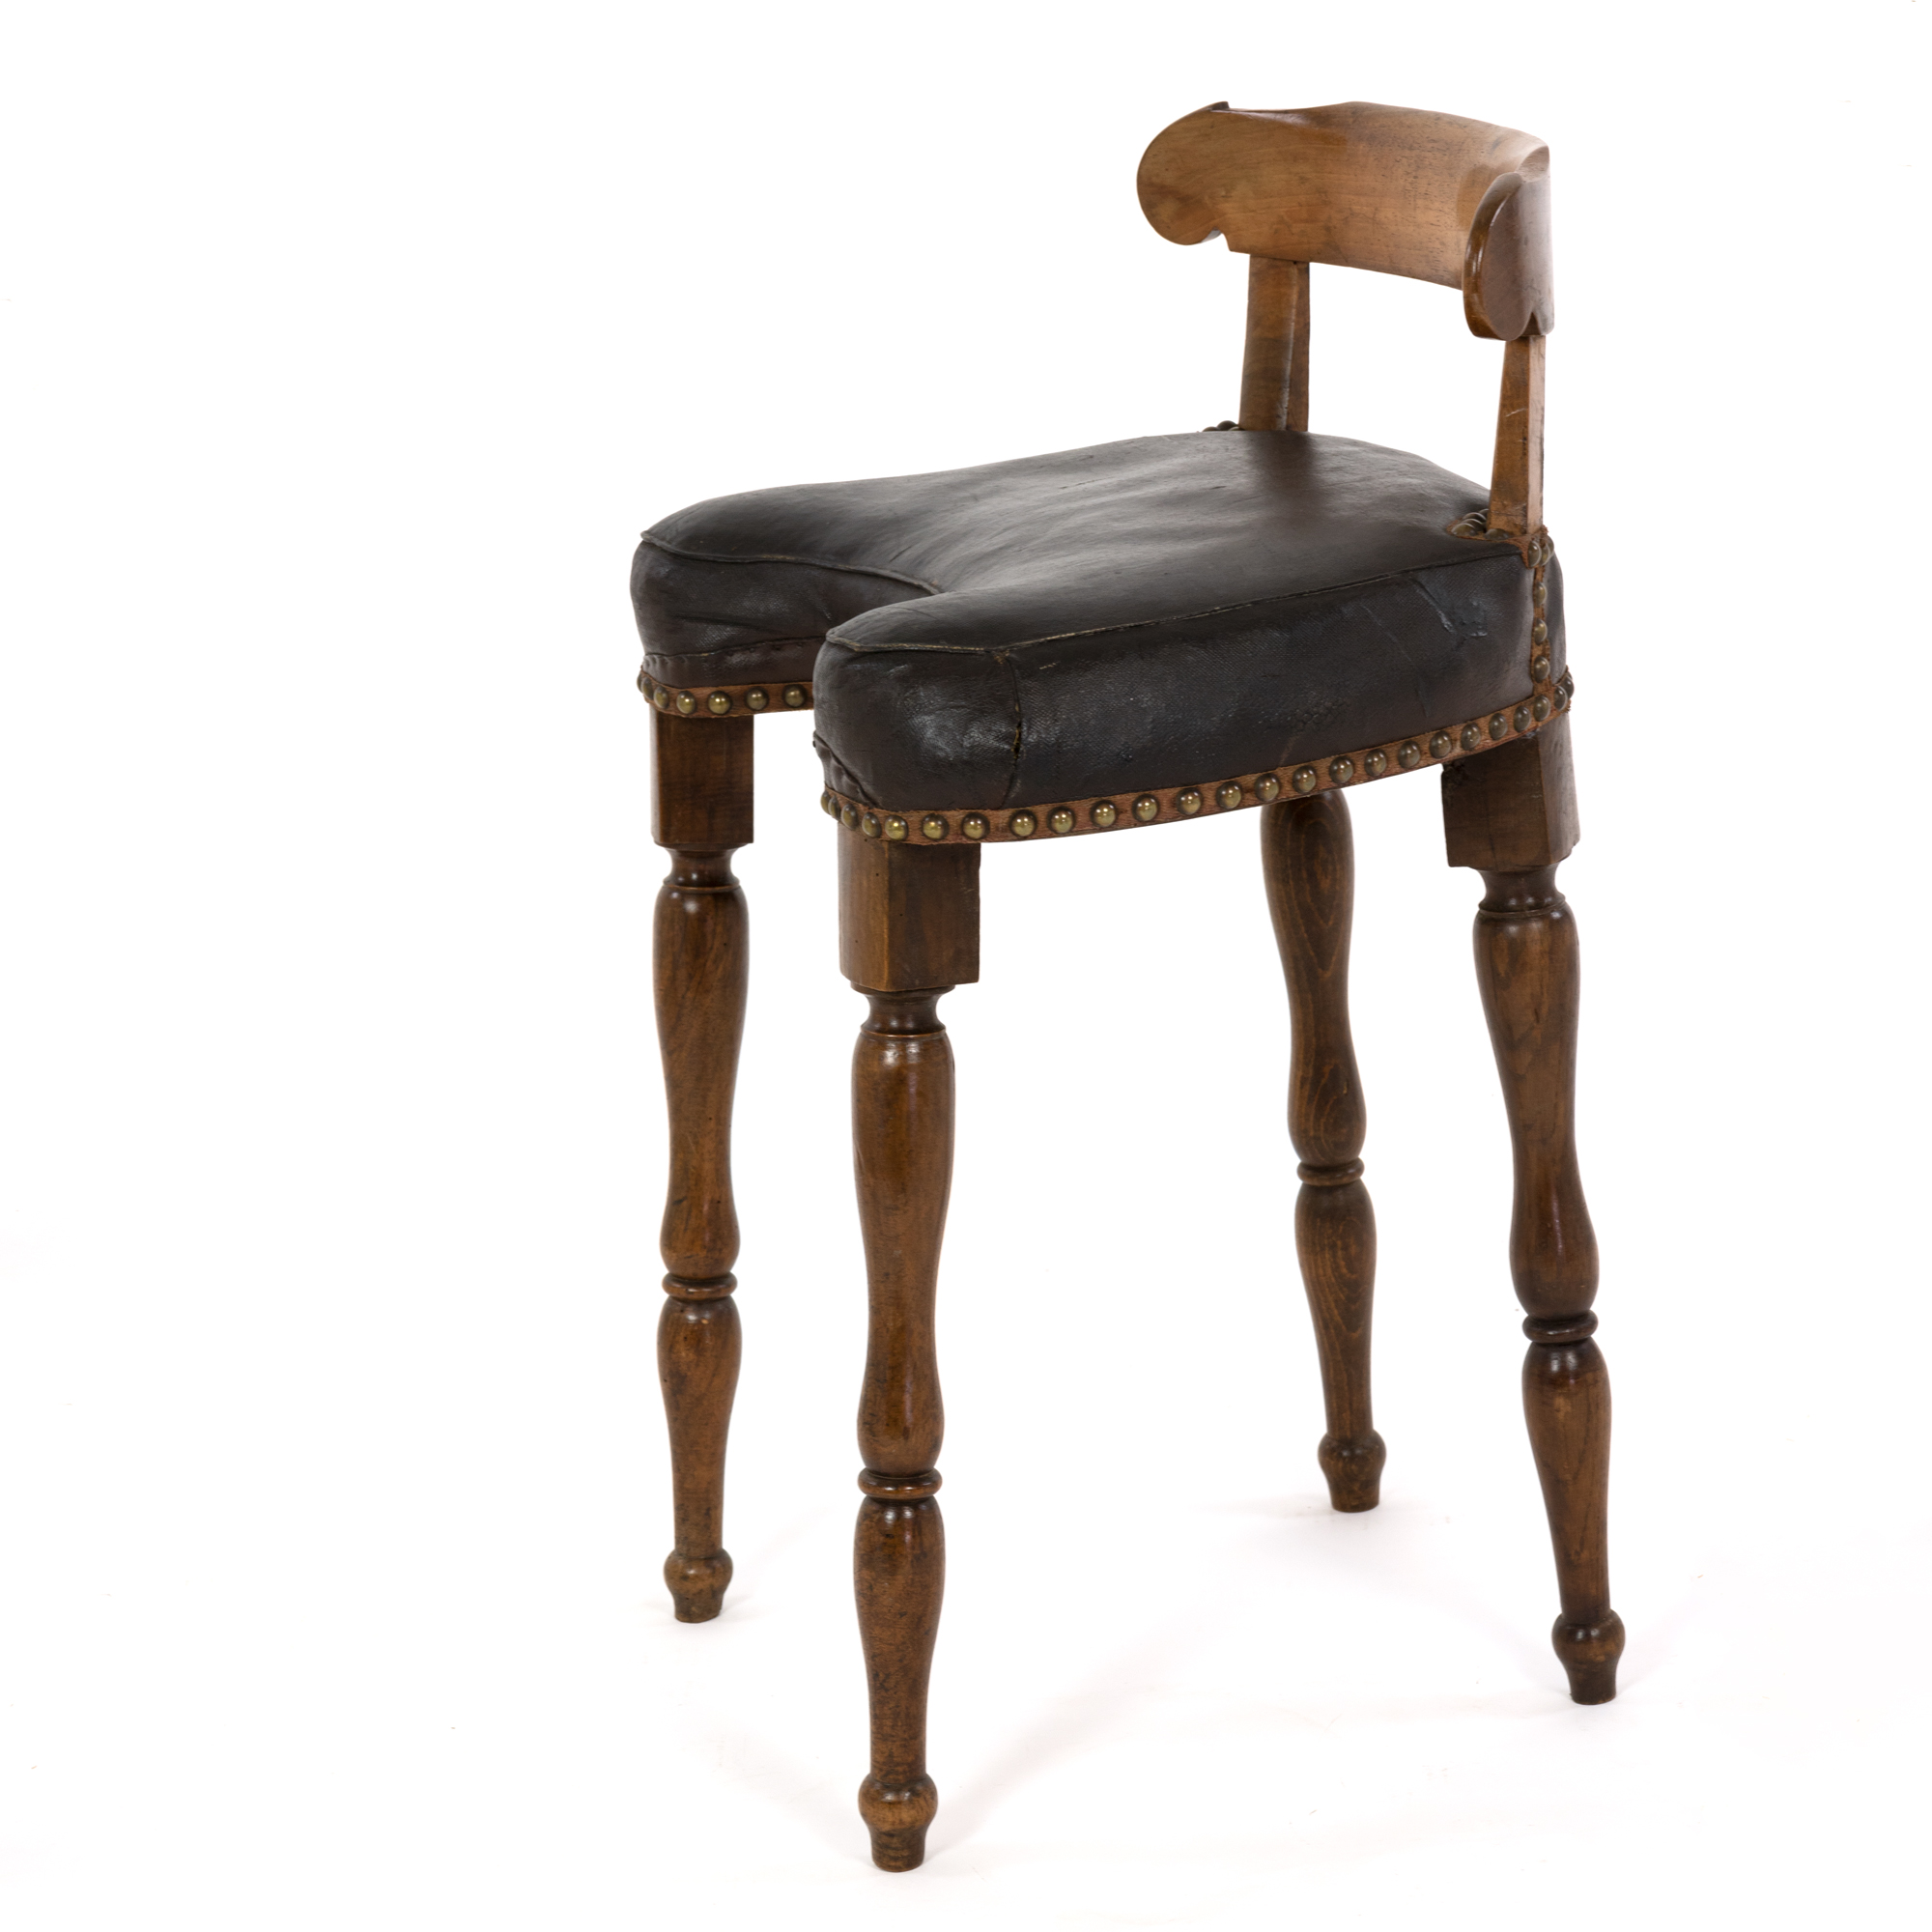 Creatice Antique Birthing Chair Price for Living room